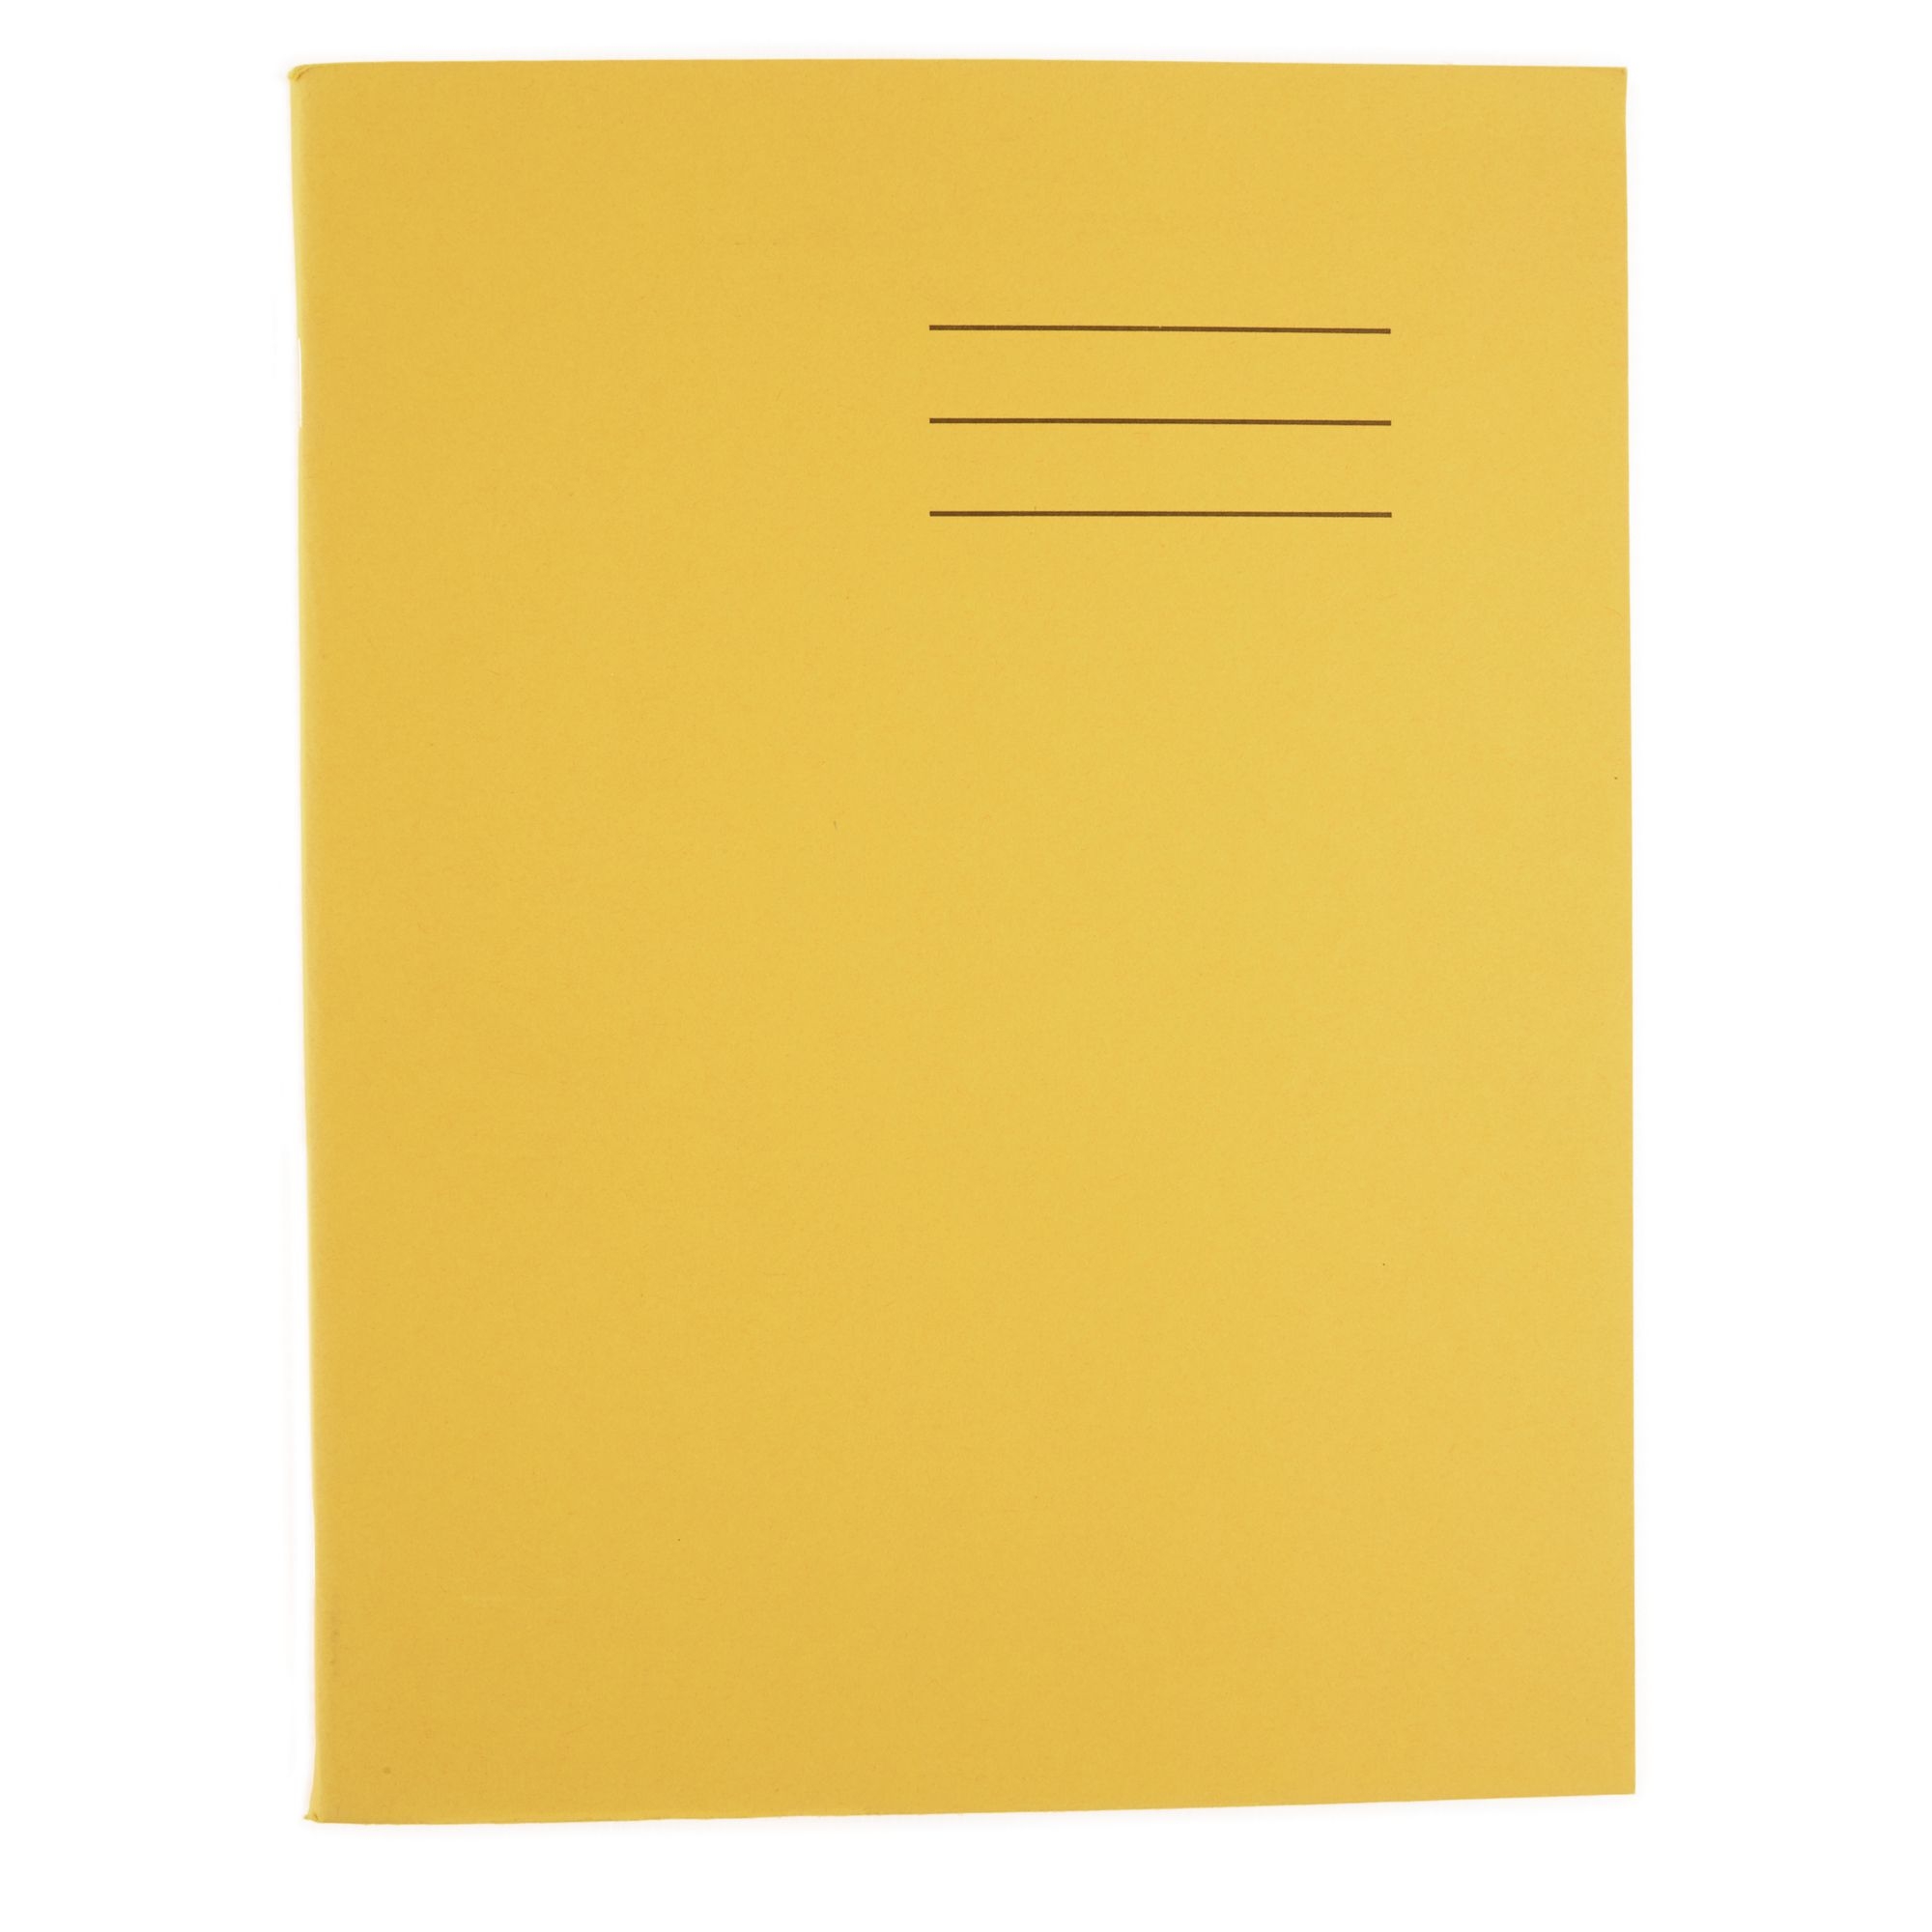 A4 Exercise Book 32 Page, Top Half Plain Bottom 15mm Ruled, Yellow - Pack of 100